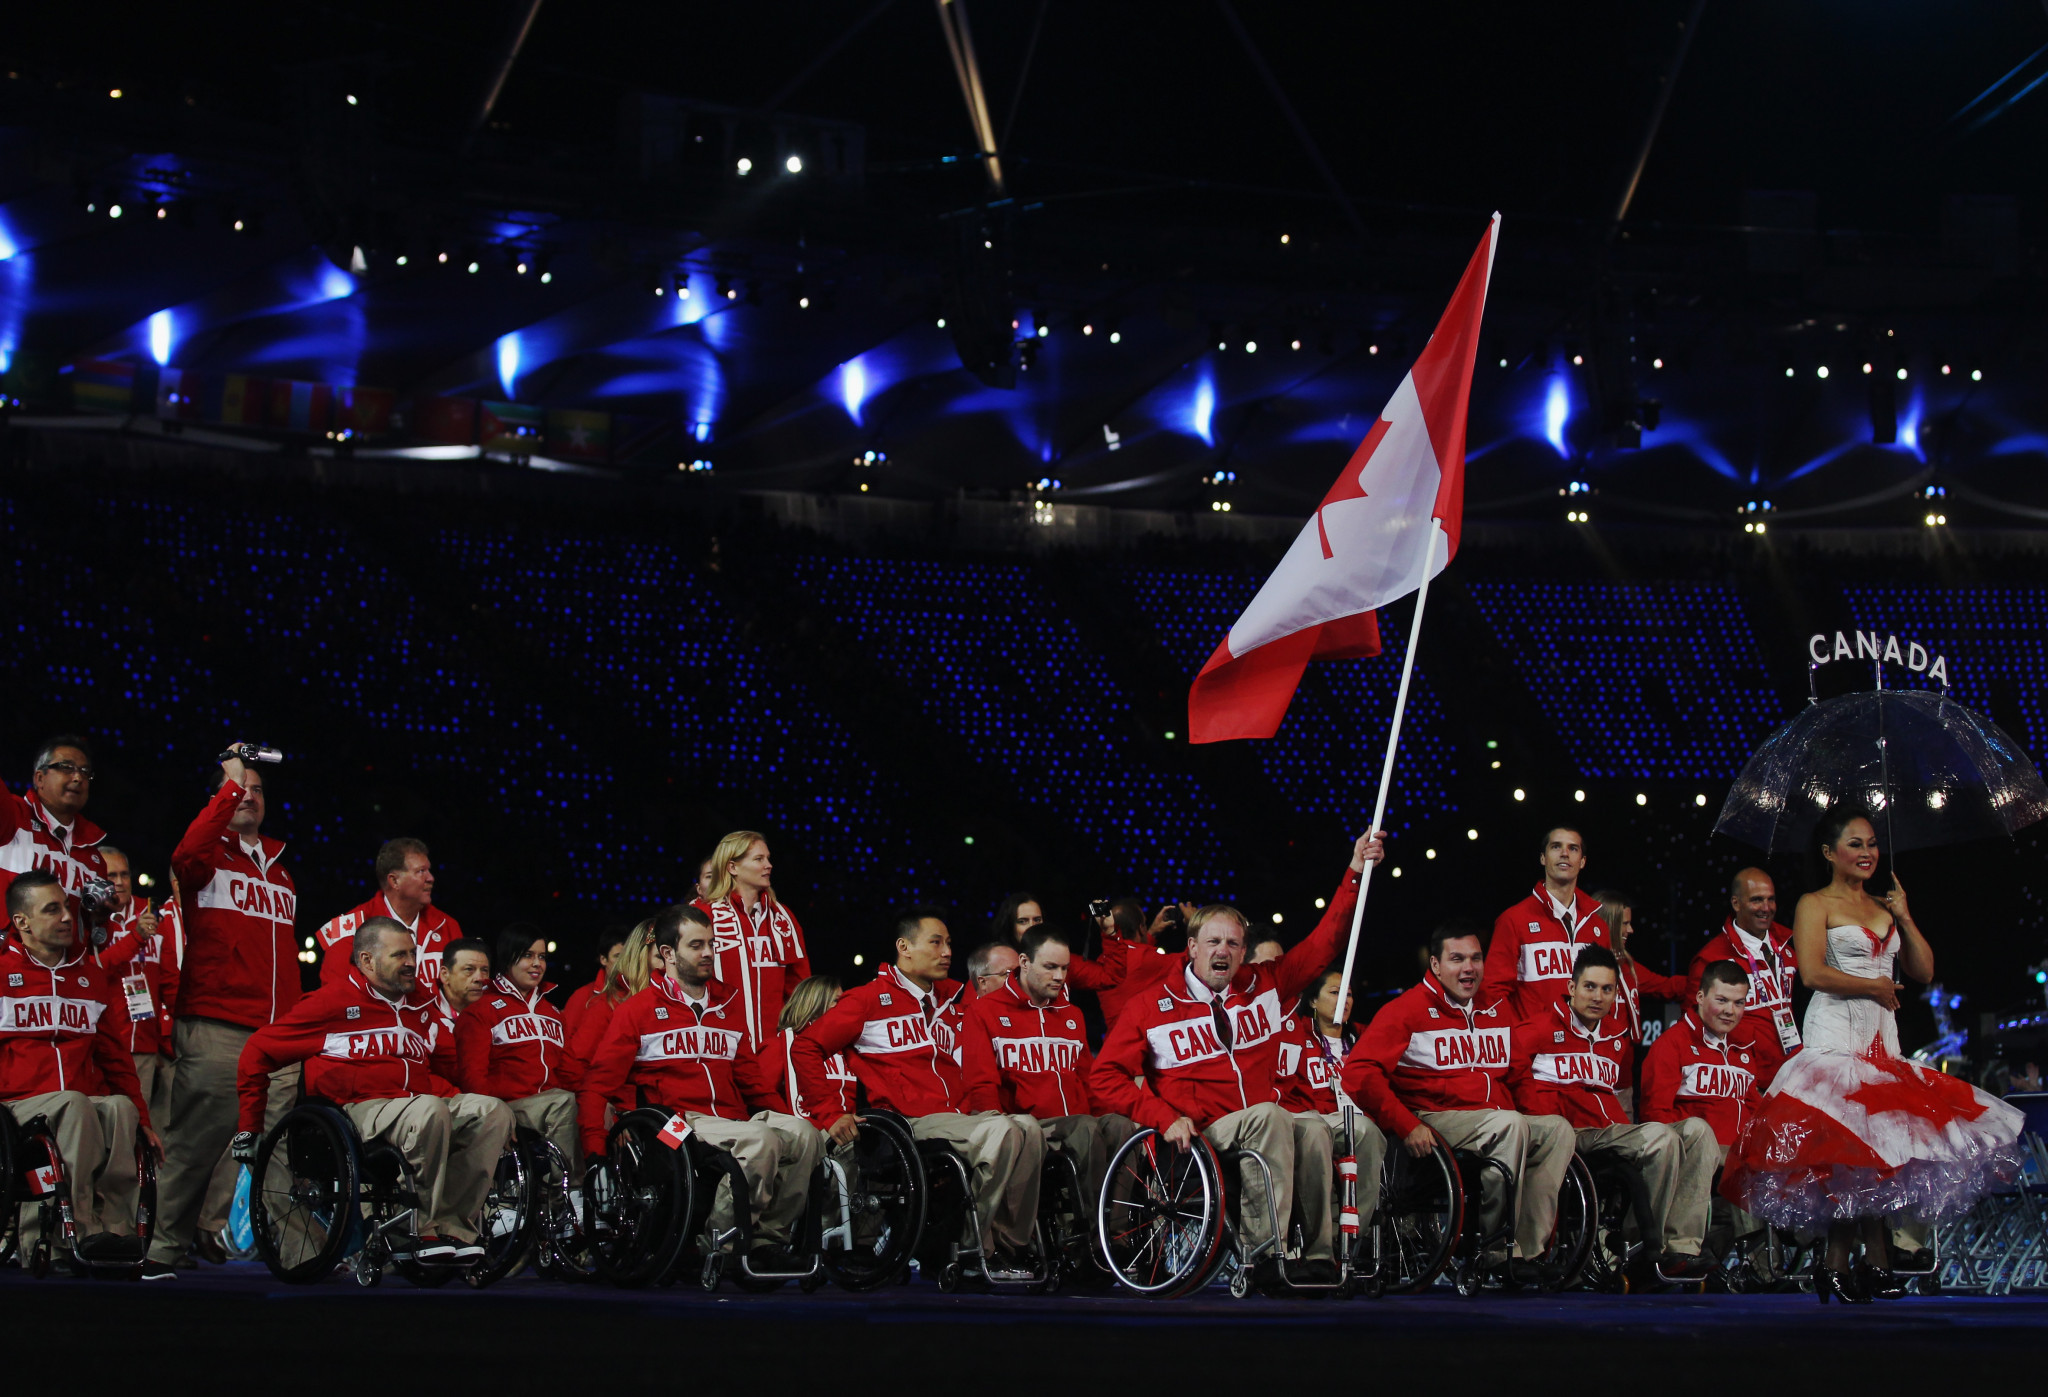 Fabien re-elected Canadian Paralympic Committee President